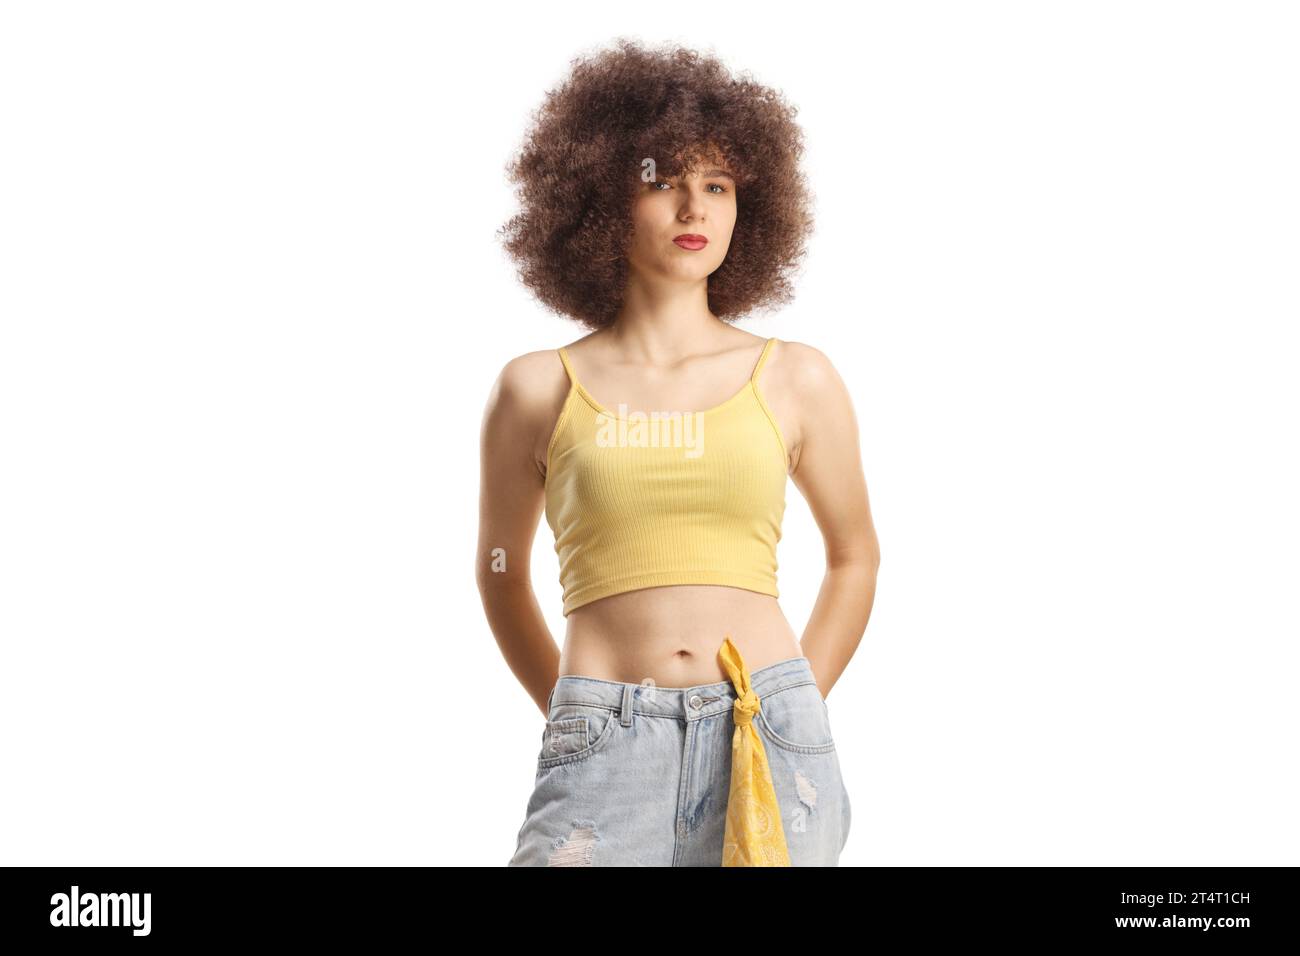 Young caucasian woman with afro hairstyle posing isolated on white background Stock Photo